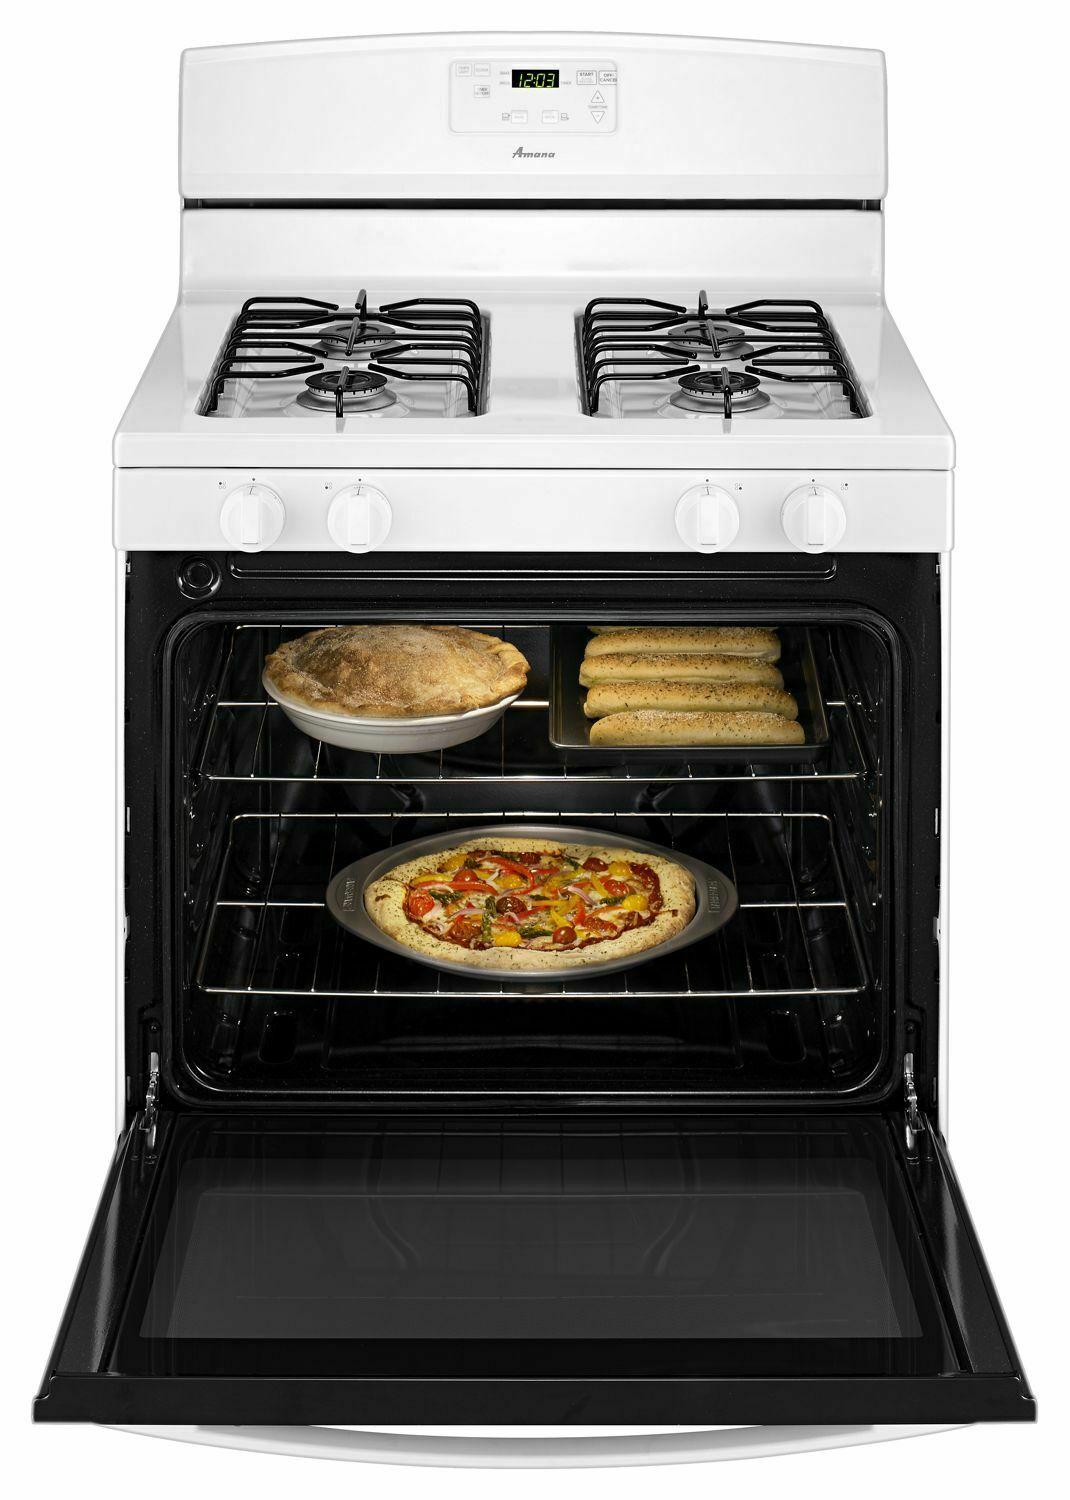 30-inch Gas Range with Easy Touch Electronic Controls - White